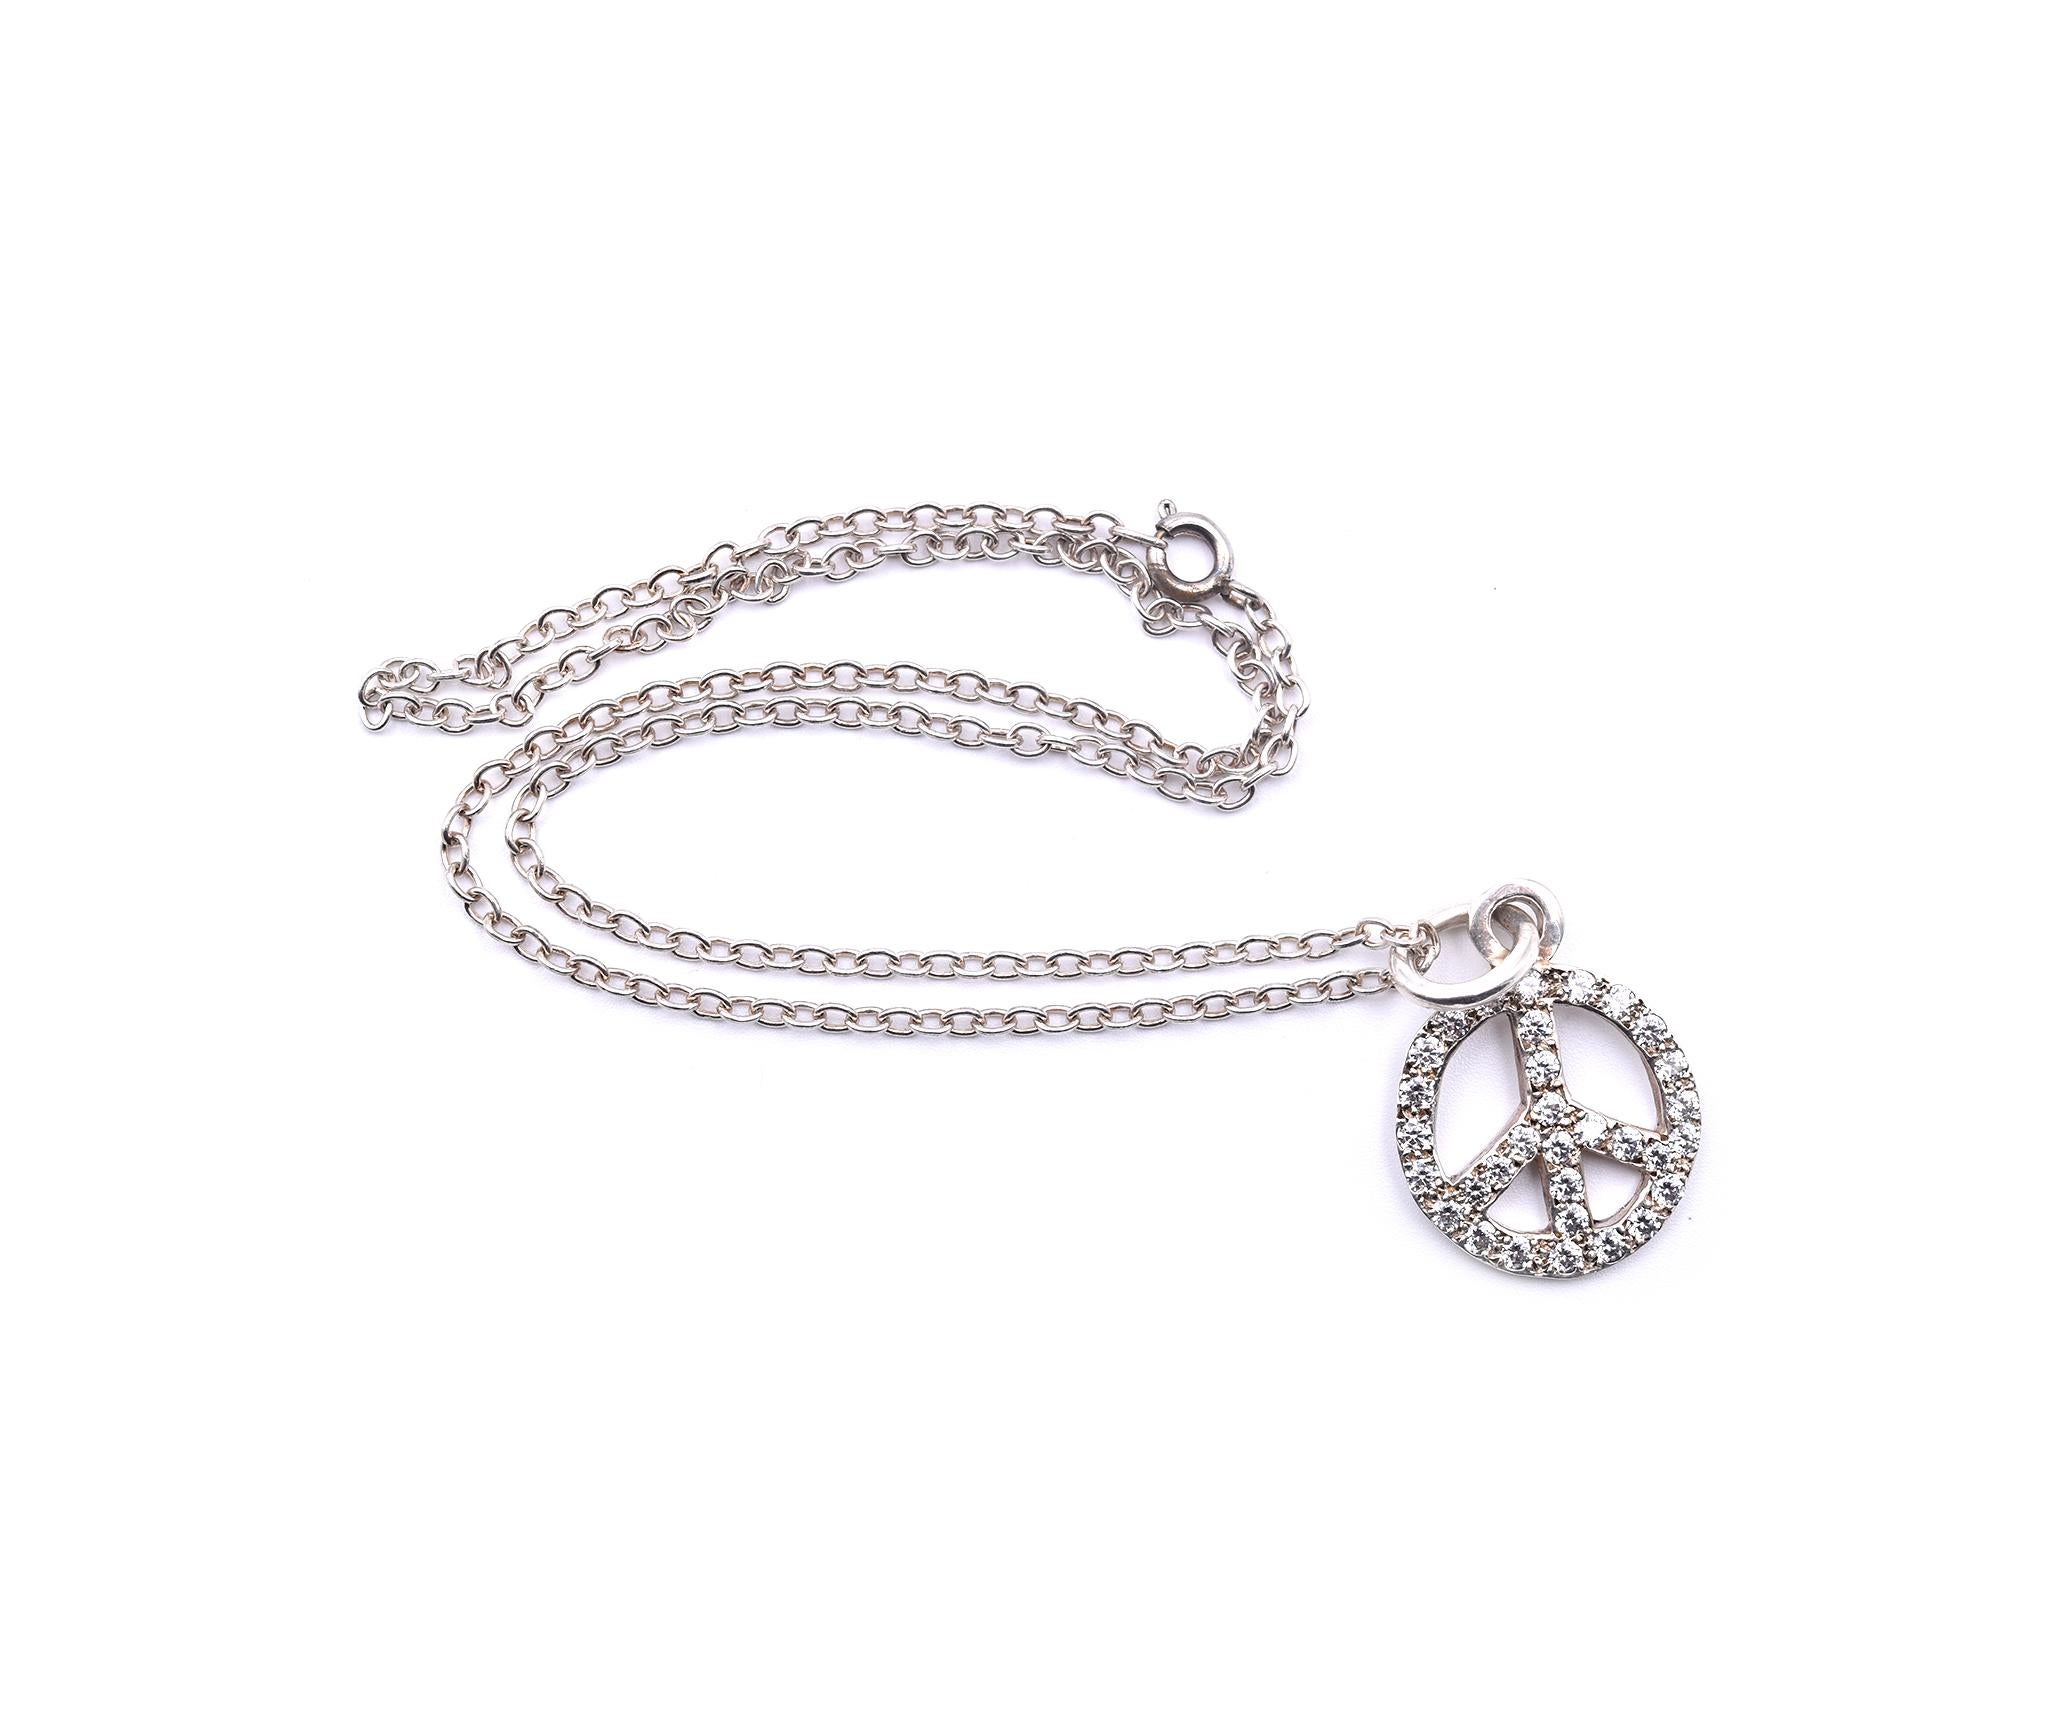 Designer: Lee Brevard
Material: sterling silver
Diamonds: 32 round brilliant cut= 2.00cttw
Color: G
Clarity: VS
Dimensions: necklace is 16-inches long, pendant is 1 ¼-inch long and approximately 20mm in diameter
Weight: 8.18 grams 
